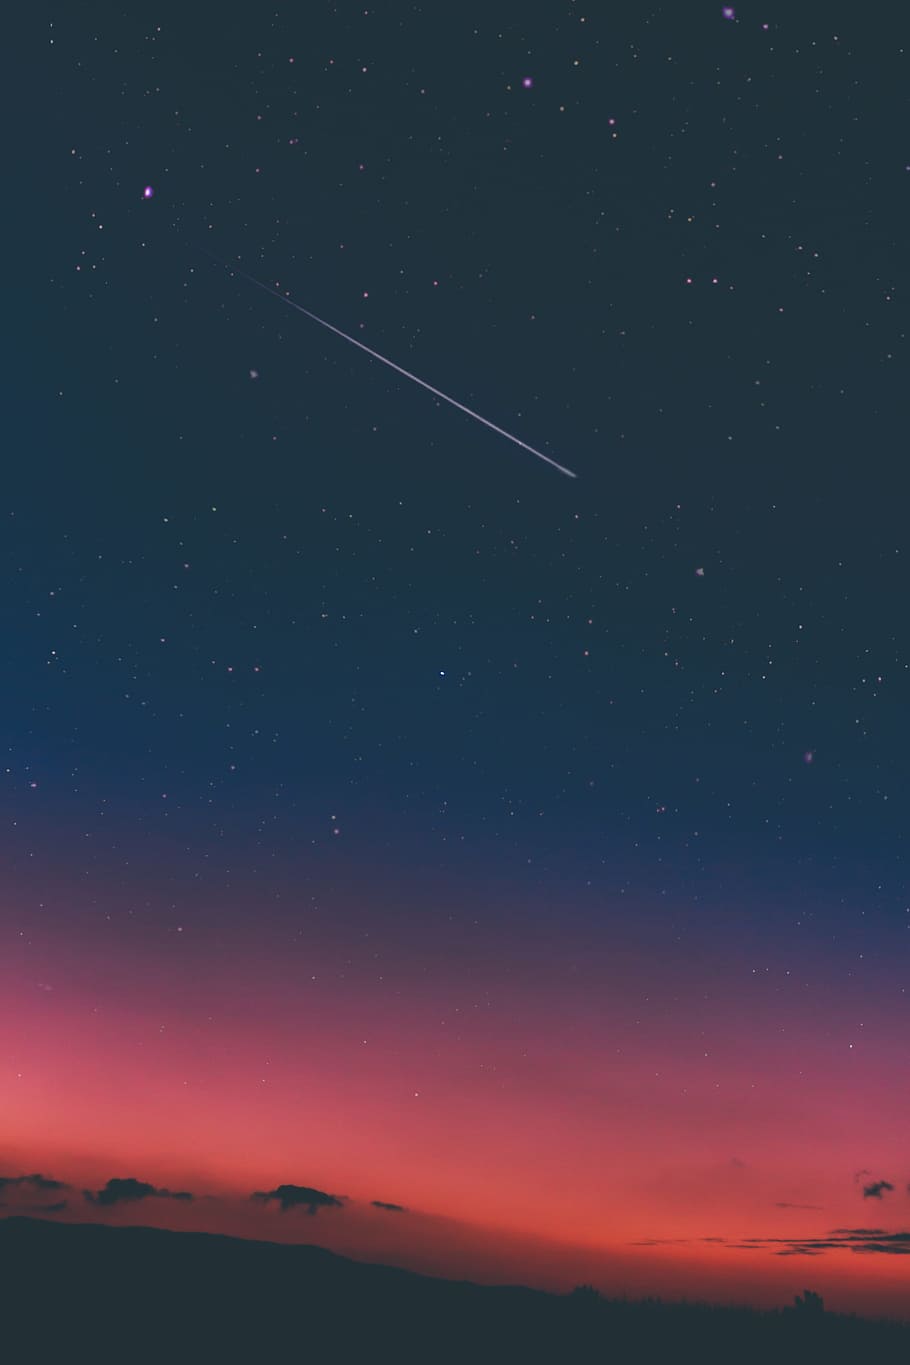 3840x2160px Free Download Hd Wallpaper Shooting Star In Night Sky